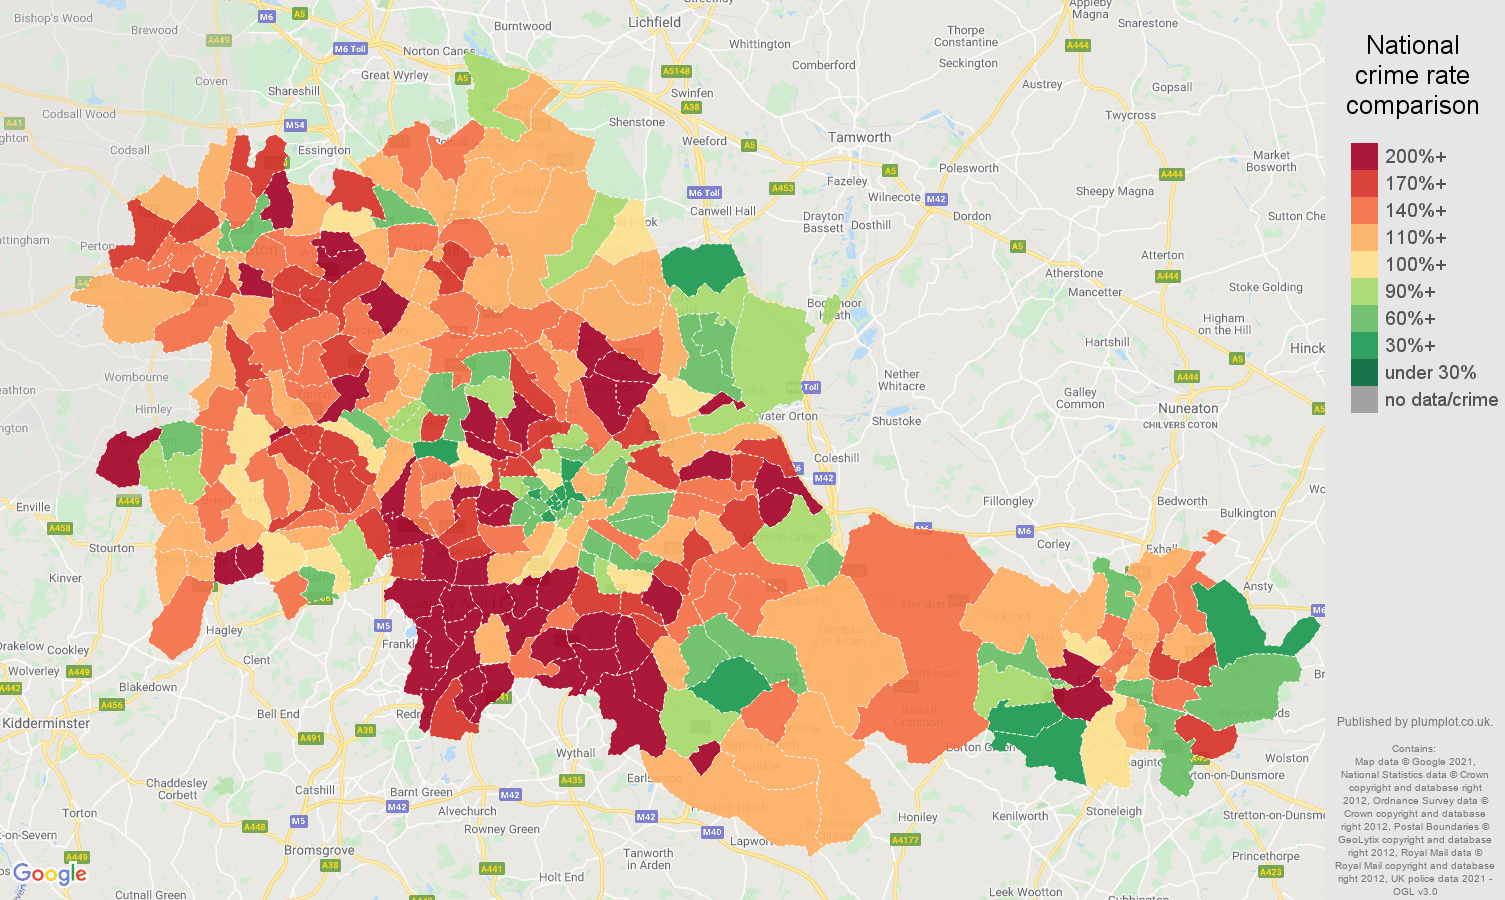 West Midlands county burglary crime rate comparison map